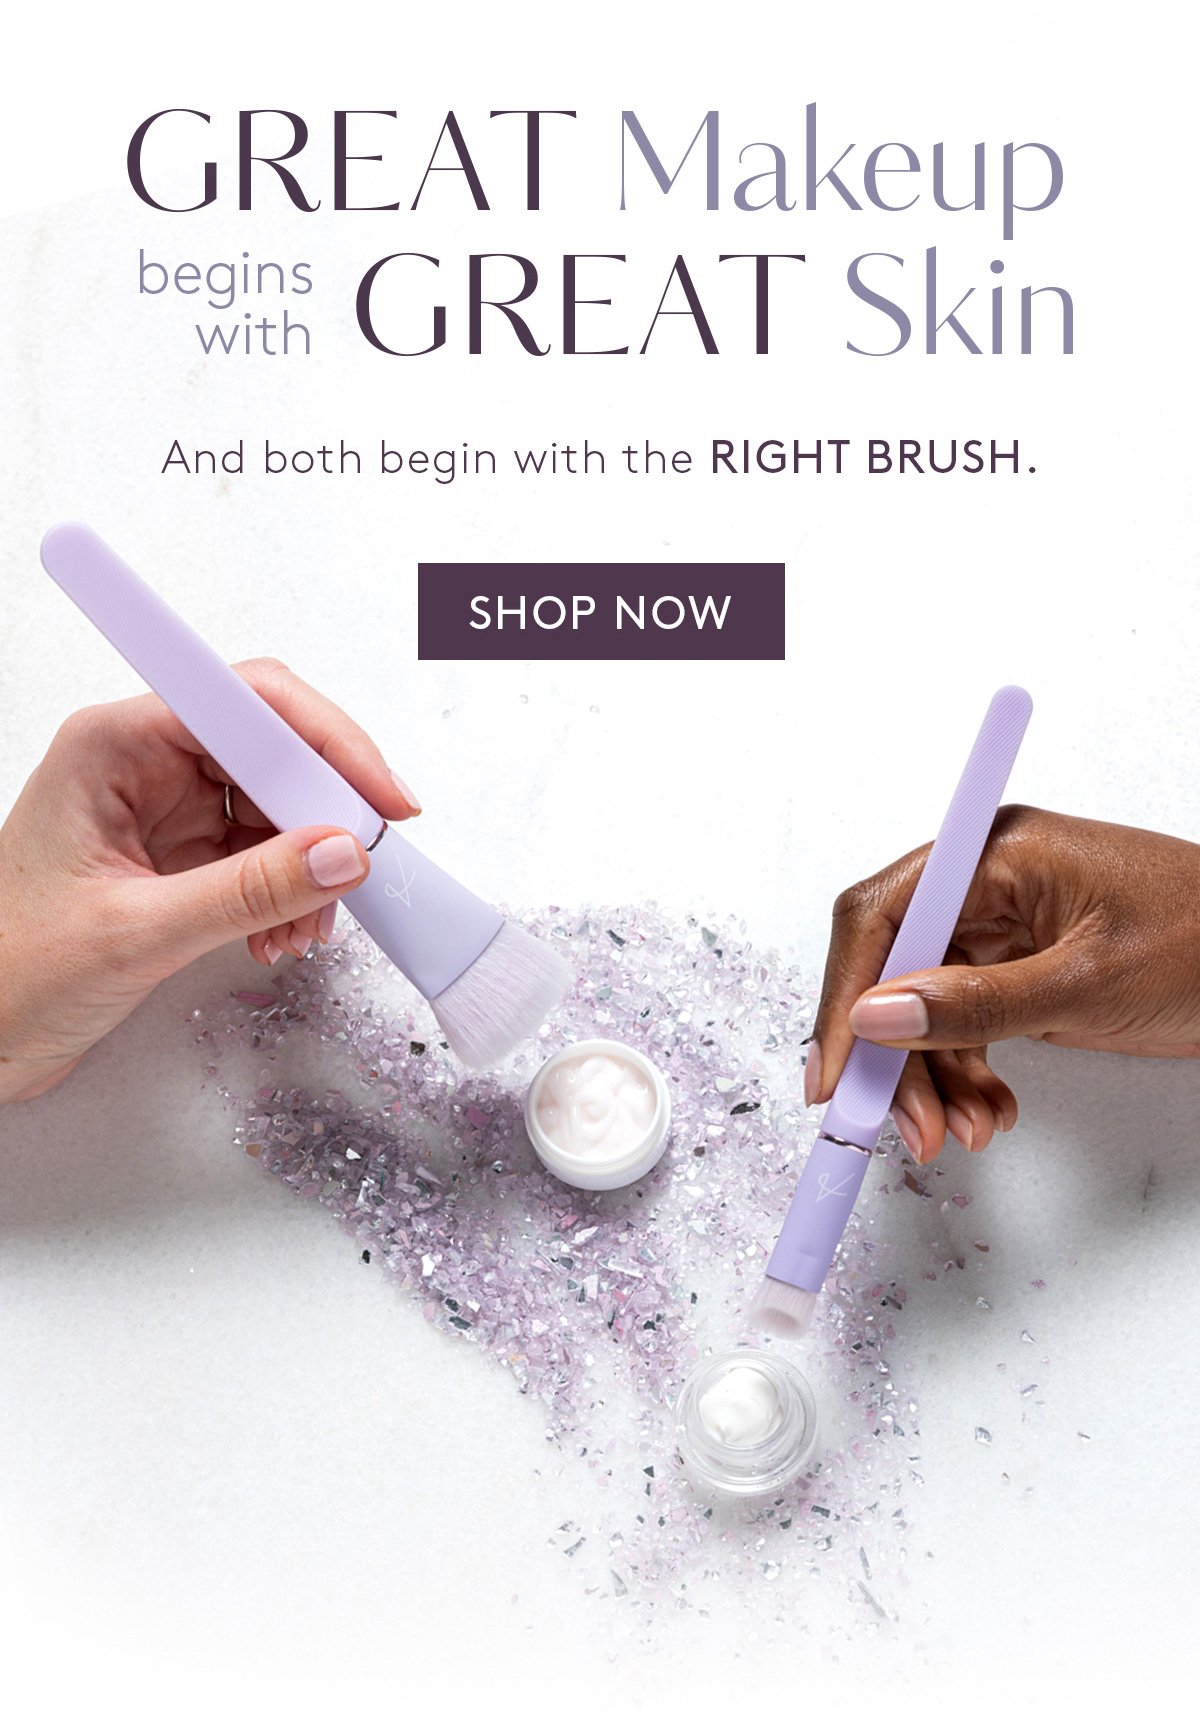 Great Makeup Begins With Great Skin. And both begin with the Right Brush. Shop Now.